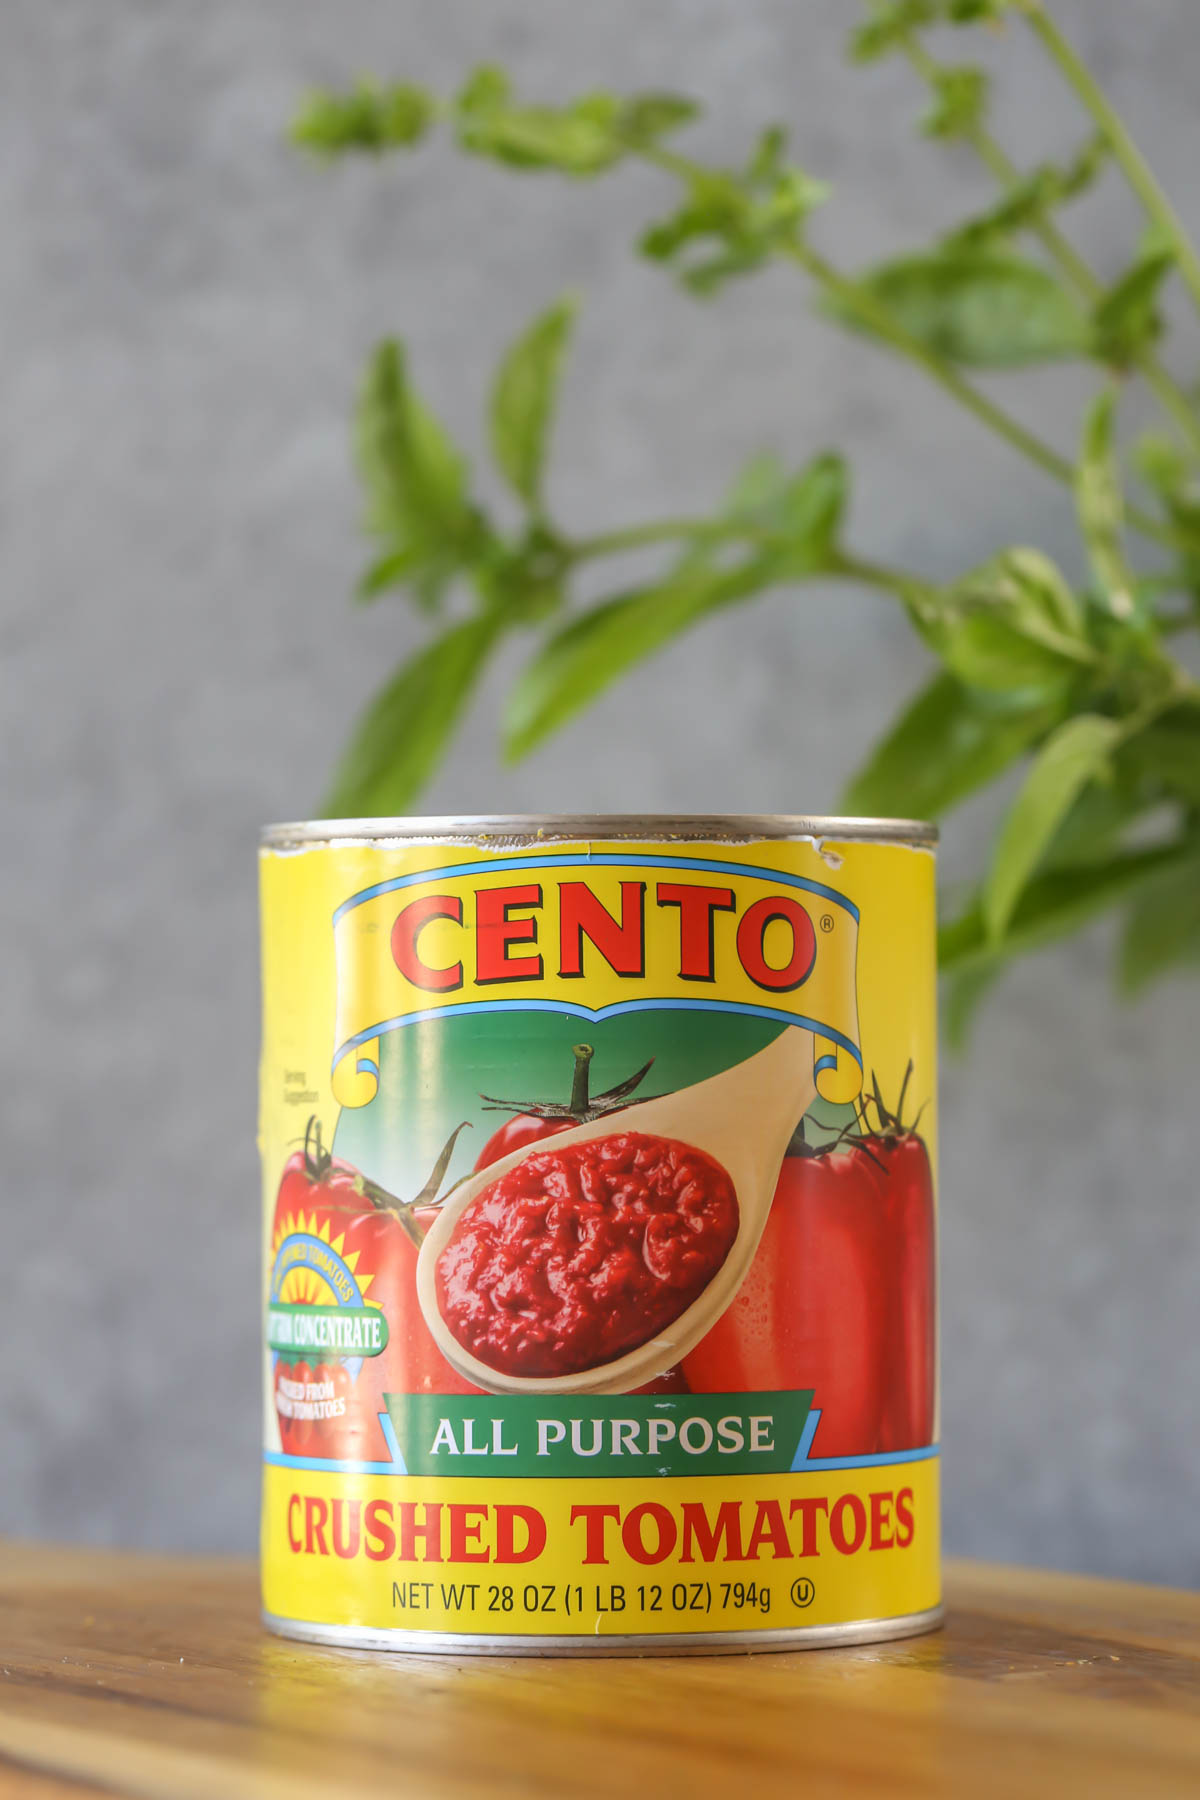 A can of Cento tomatoes used in the Creamy Balsamic Tomato Soup.  